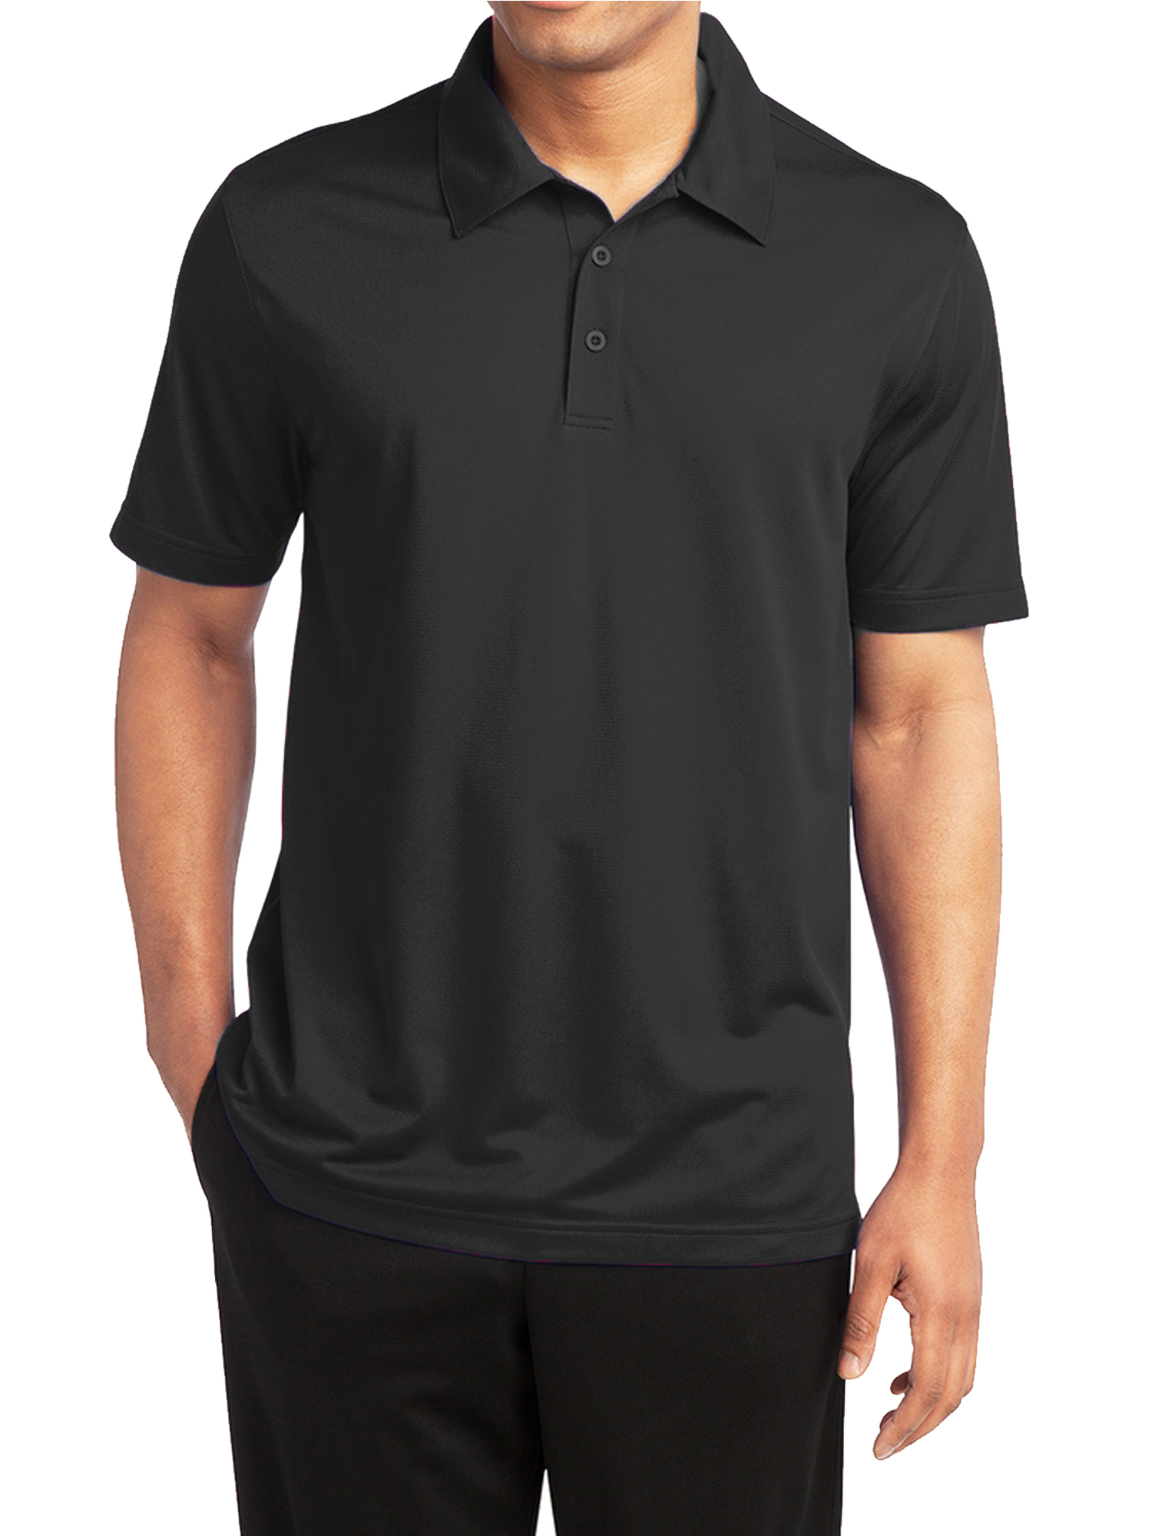 Wholesale Men's Dry Fit Polo Shirts in Black, Size 3XL - DollarDays